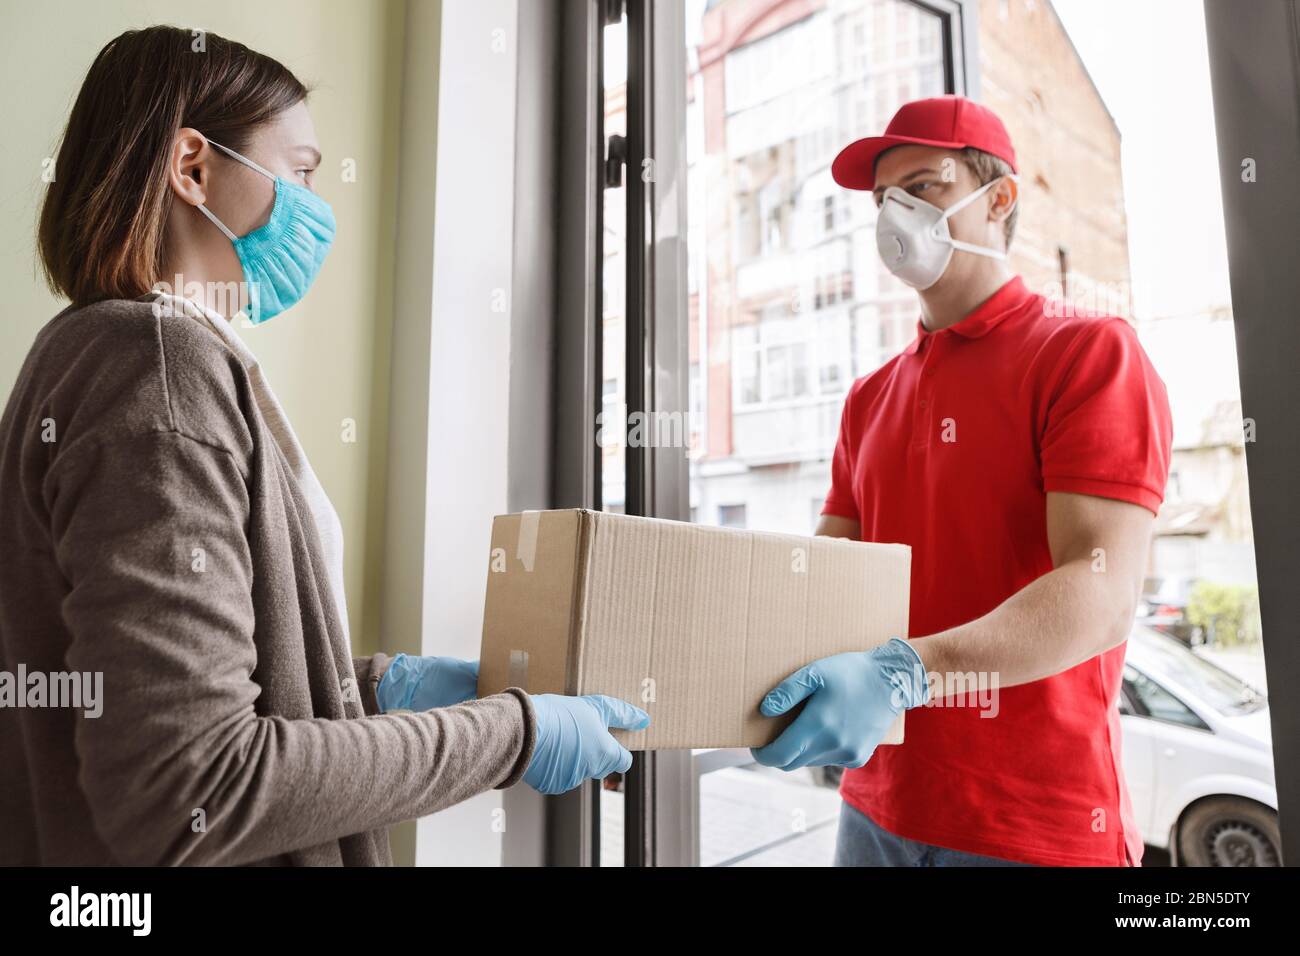 Courier delivery during quarantine. Girl opens door and takes parcel from deliveryman Stock Photo